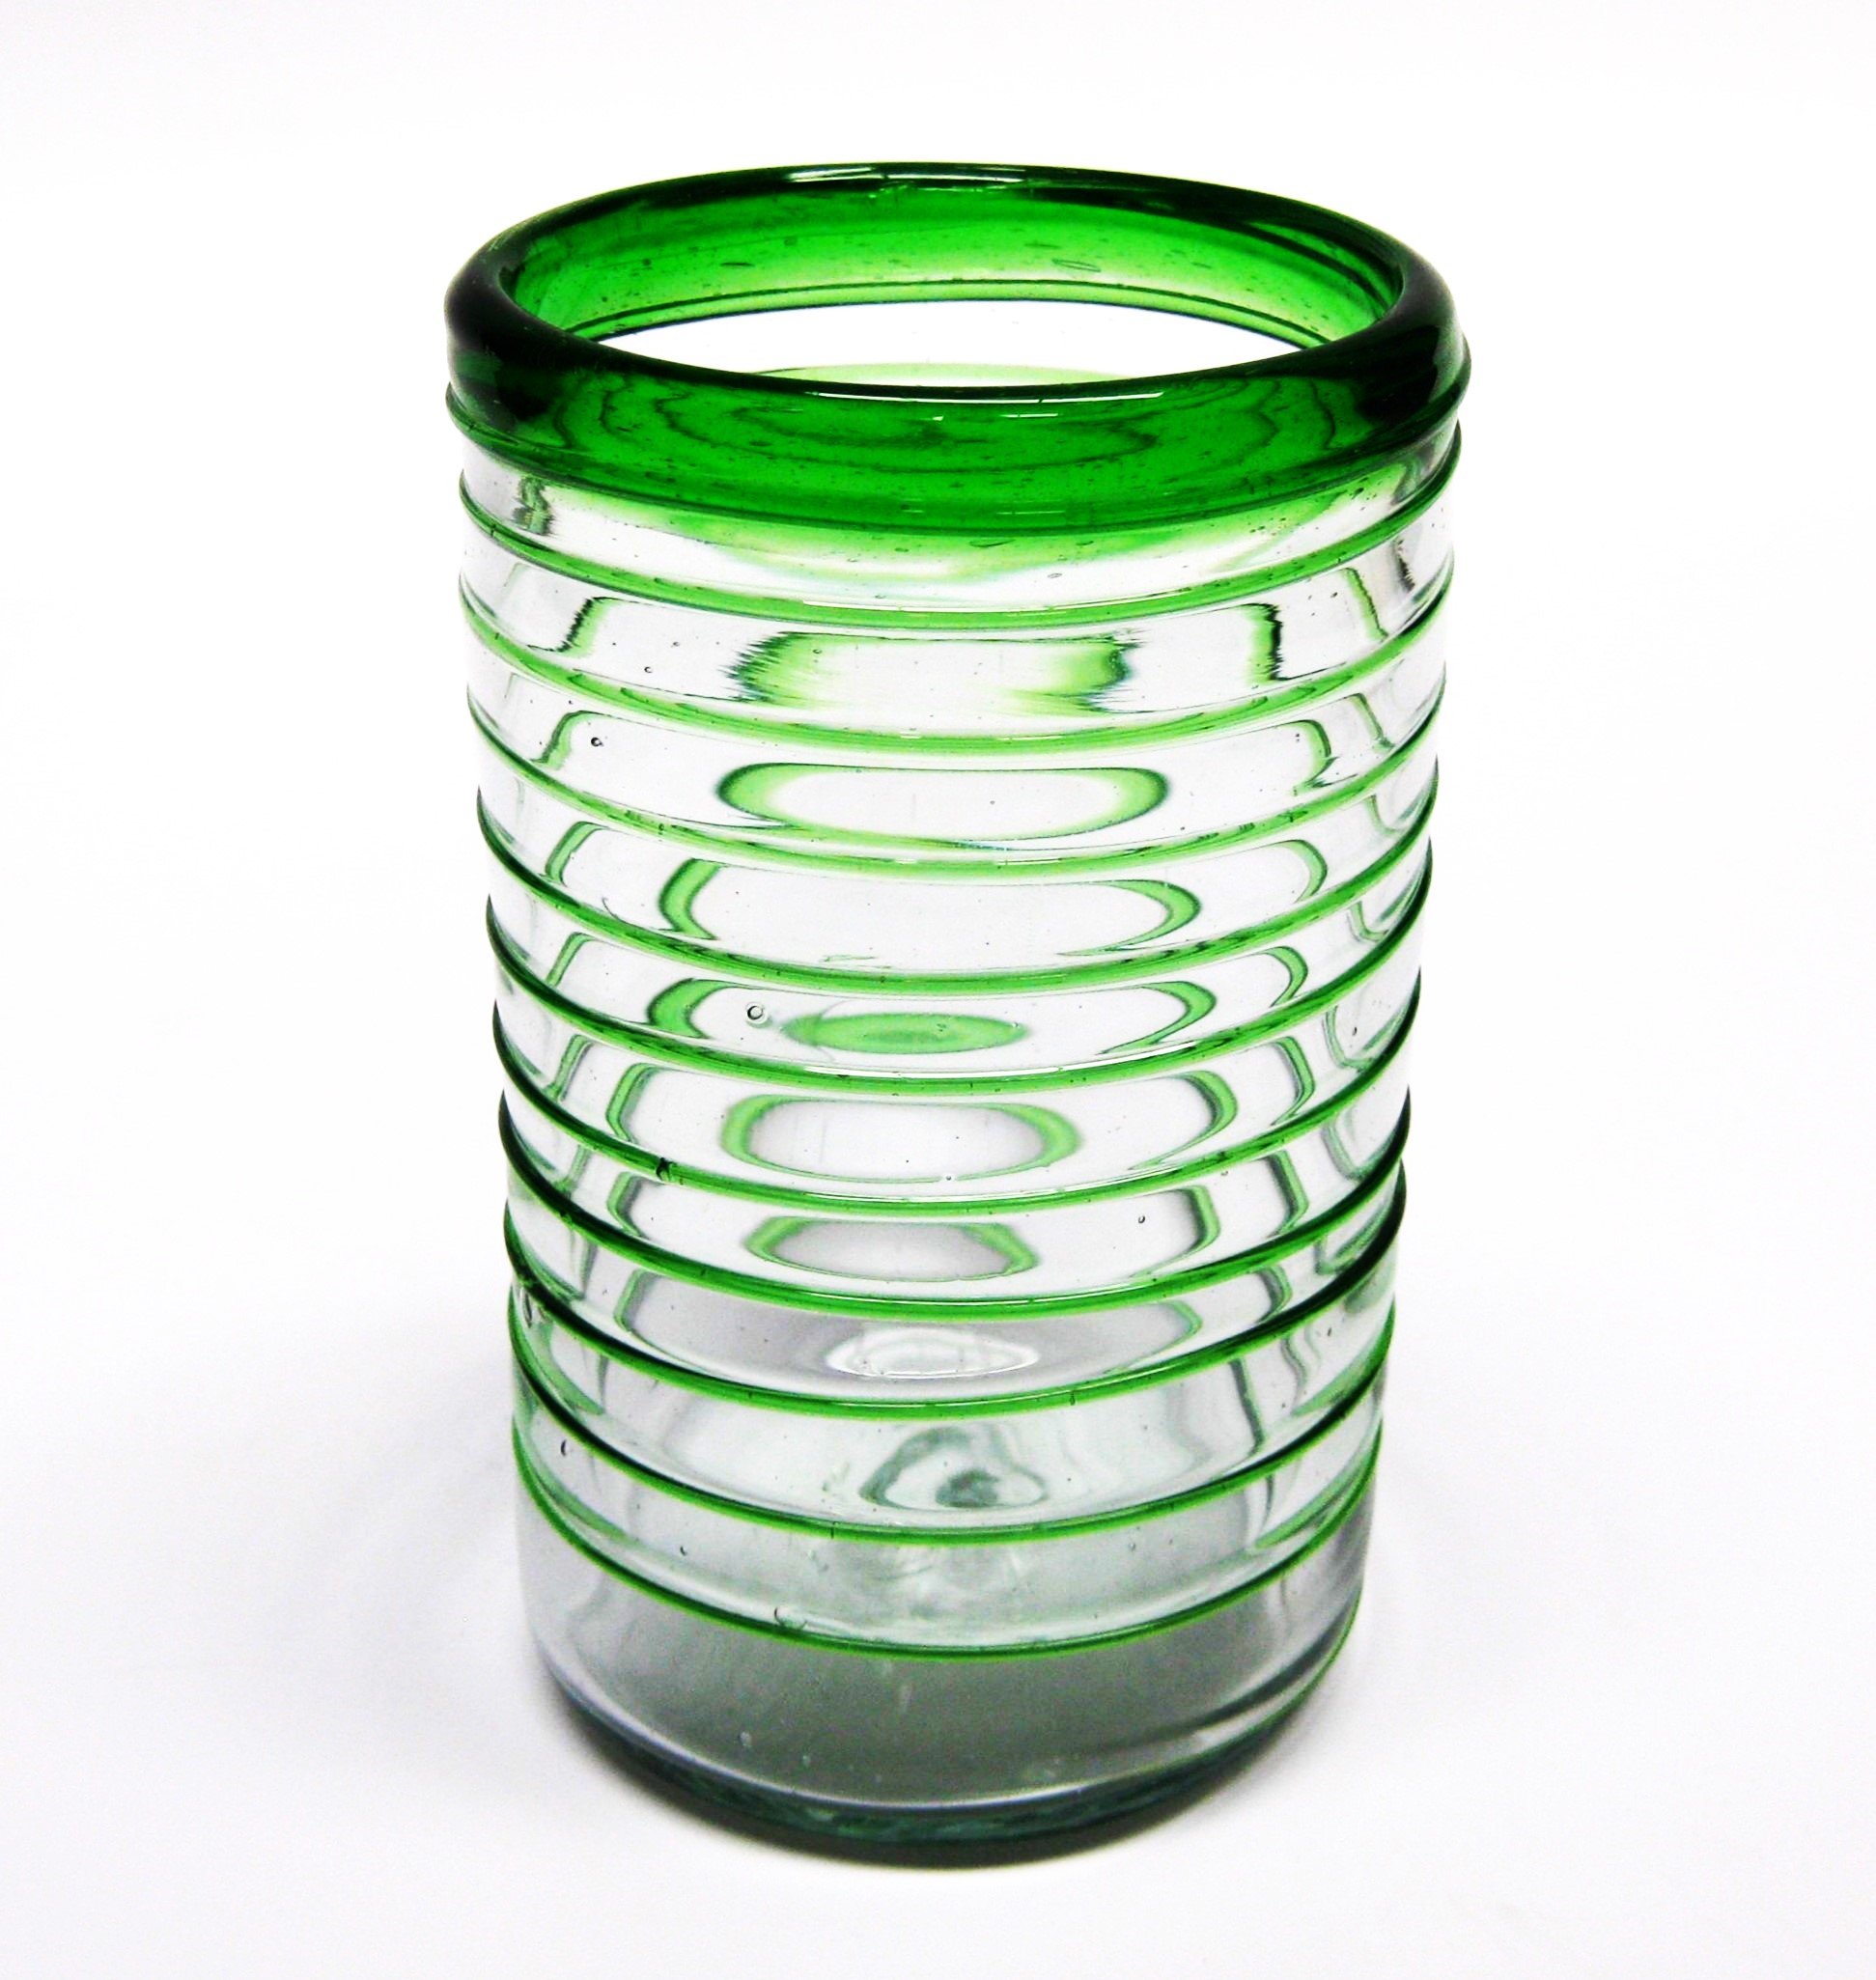 Wholesale Spiral Glassware / Emerald Green Spiral 14 oz Drinking Glasses  / These elegant glasses covered in a emerald green spiral will add a handcrafted touch to your kitchen decor.